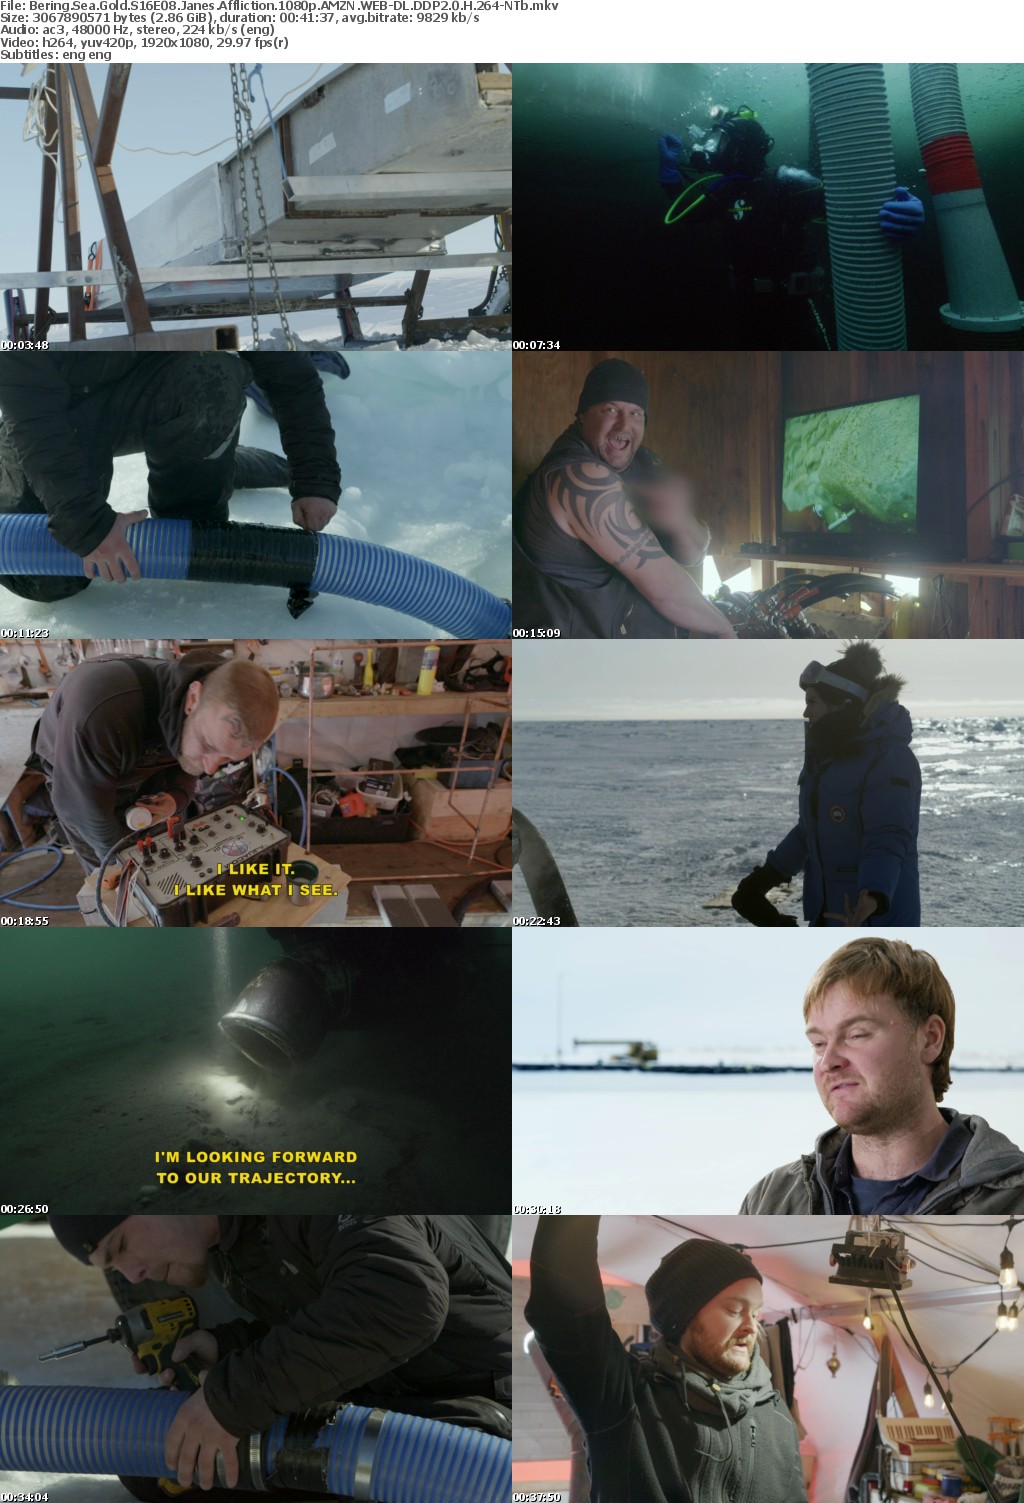 Bering Sea Gold S16E08 Janes Affliction 1080p AMZN WEB-DL DDP2 0 H 264-NTb